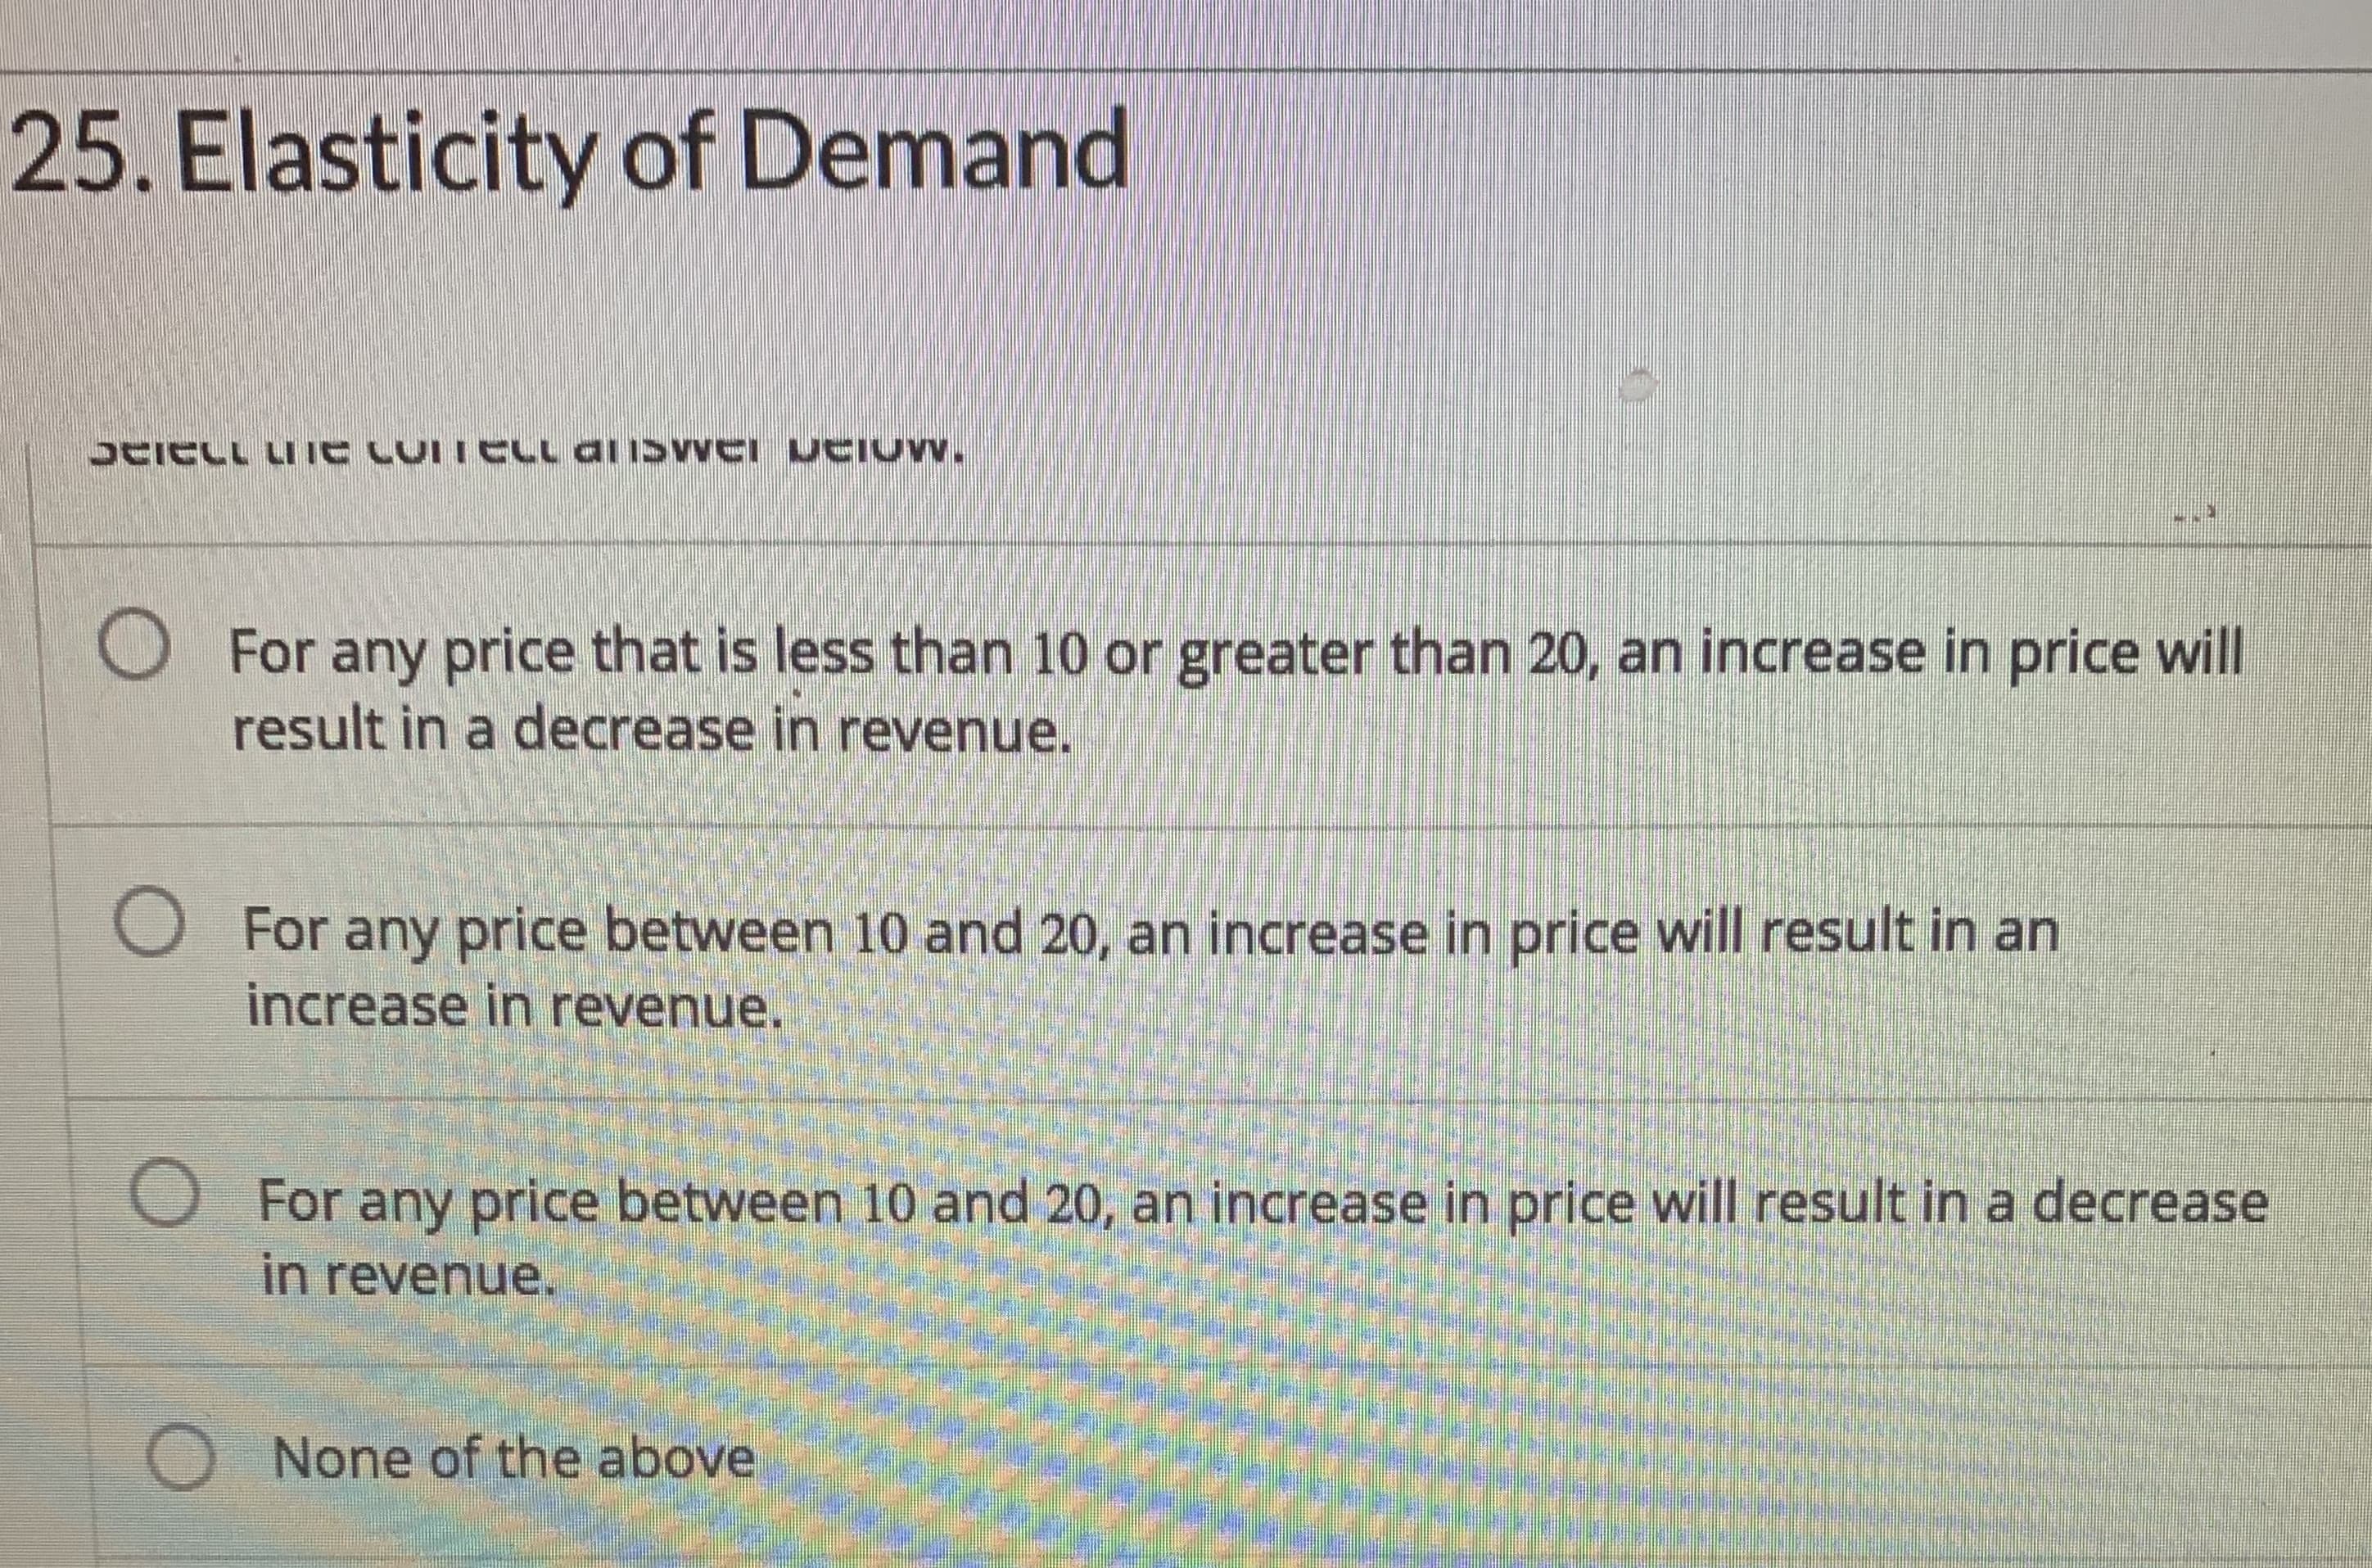 25. Elasticity of Demand
UAICLL LIIE CUITELL aliSvVEI UCIUW.
O For any price that is less than 10 or greater than 20, an increase in price will
result in a decrease in revenue.
O For any price between 10 and 20, an increase in price will result in an
increase in revenue.
O For any price between 10 and 20, an increase in price will result in a decrease
in revenue.
O None of the above
